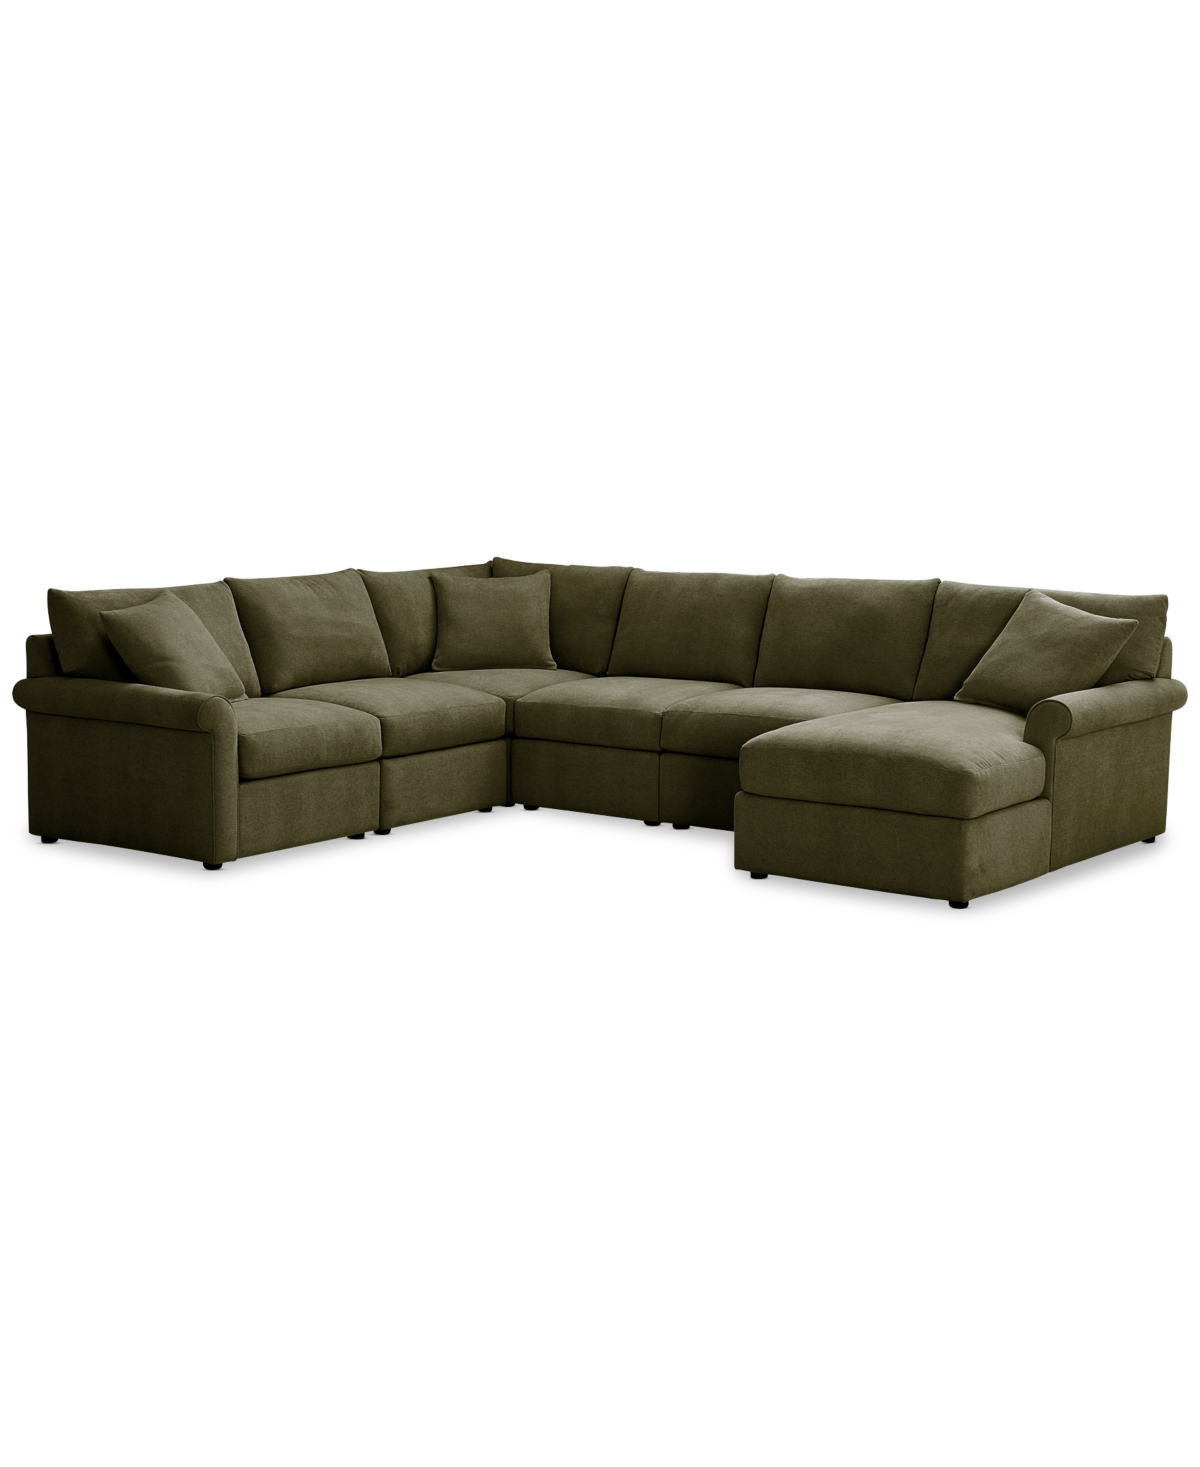 Furniture Wrenley 131" 6-pc. Fabric Modular Sectional Chaise Sofa, Created For Macy's In Olive